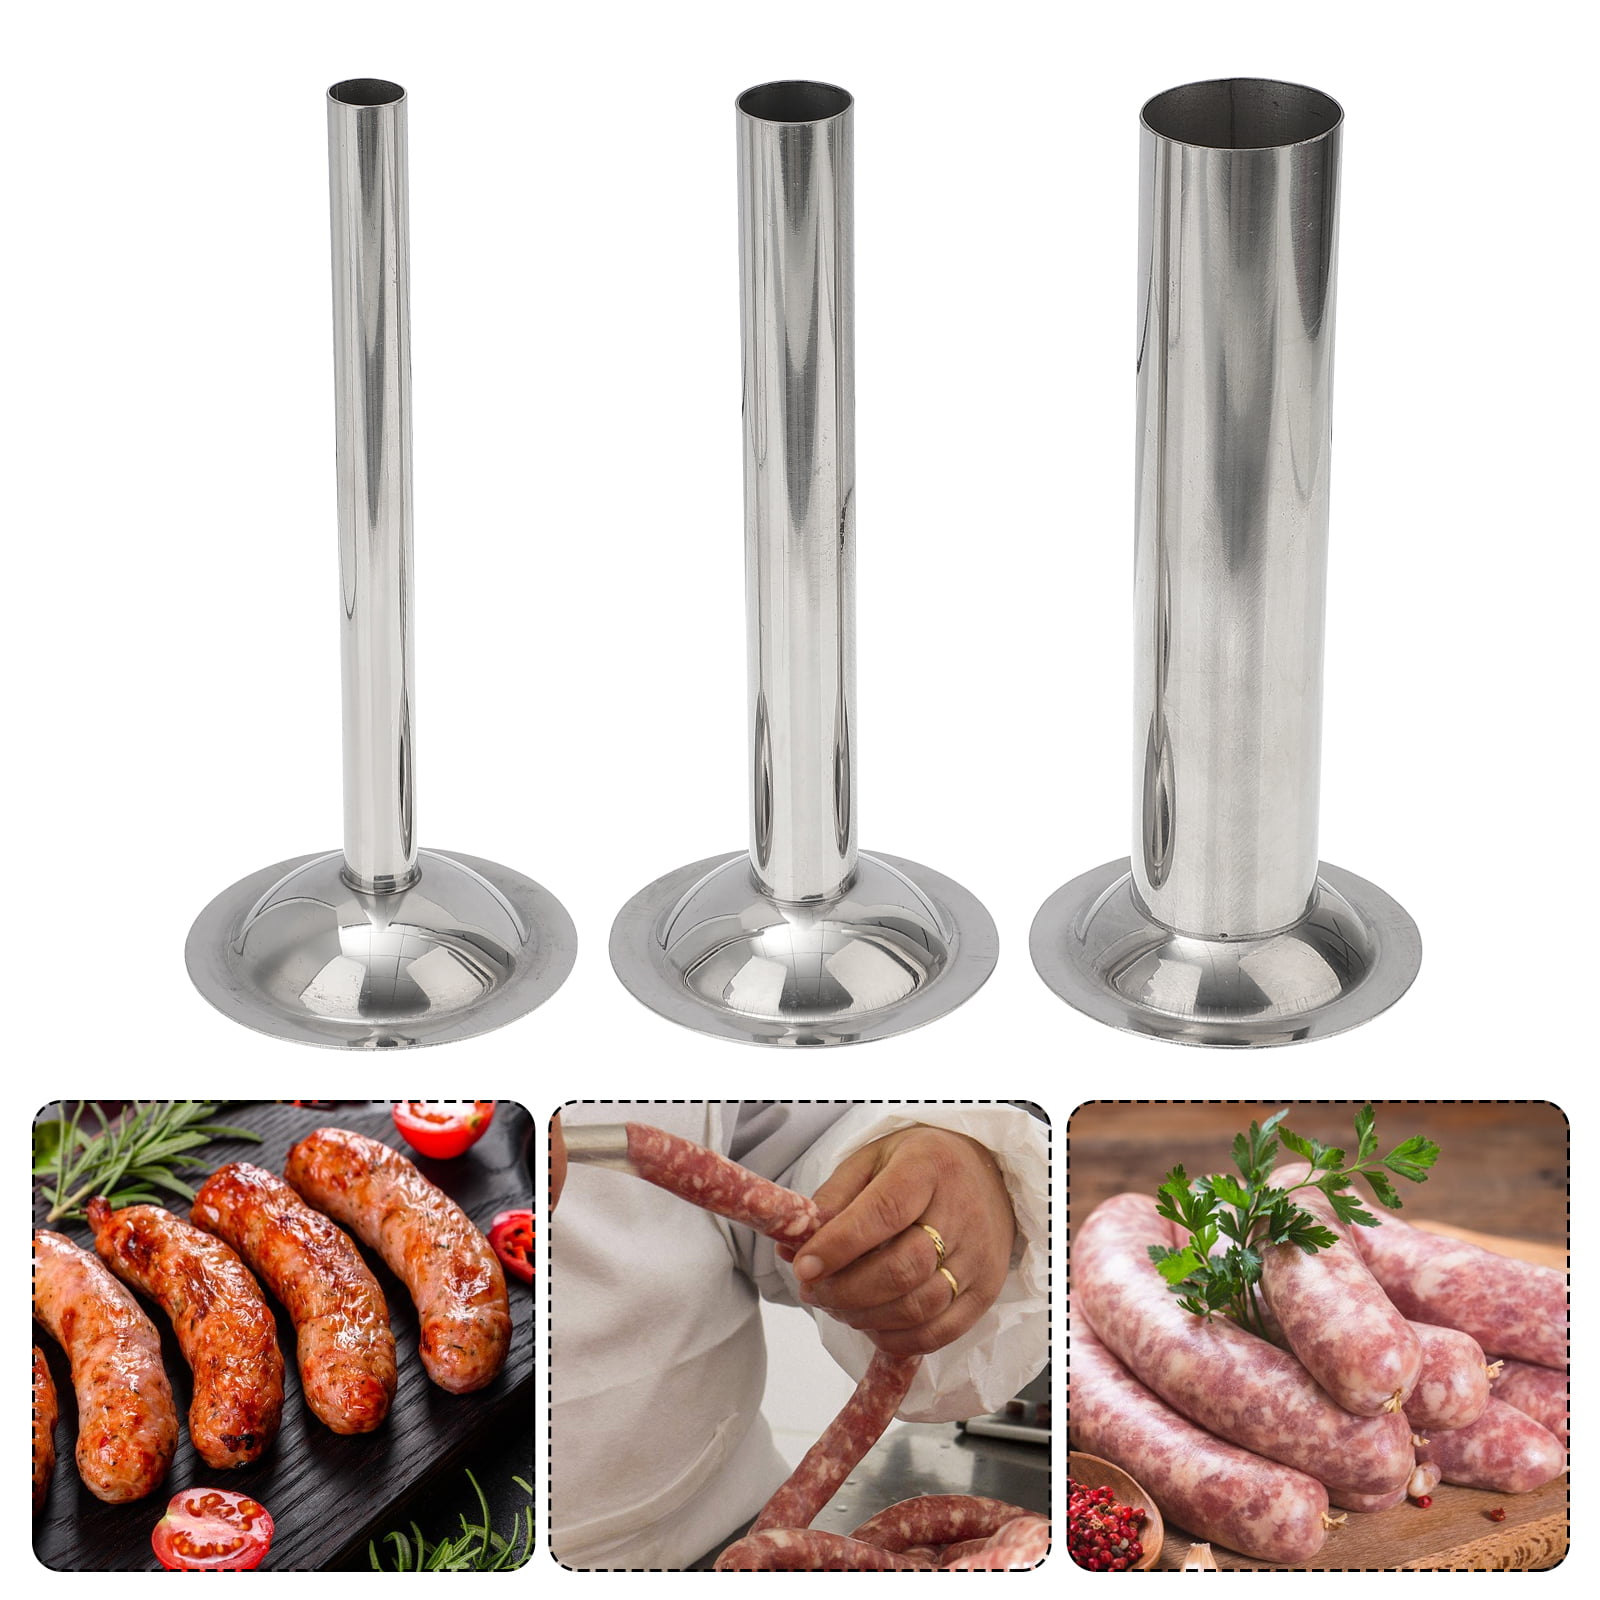 3 Pieces Stainless Steel Sausage Making Kit Deer Processing Equipment 3  Sizes Sausage Stuffer Tubes for